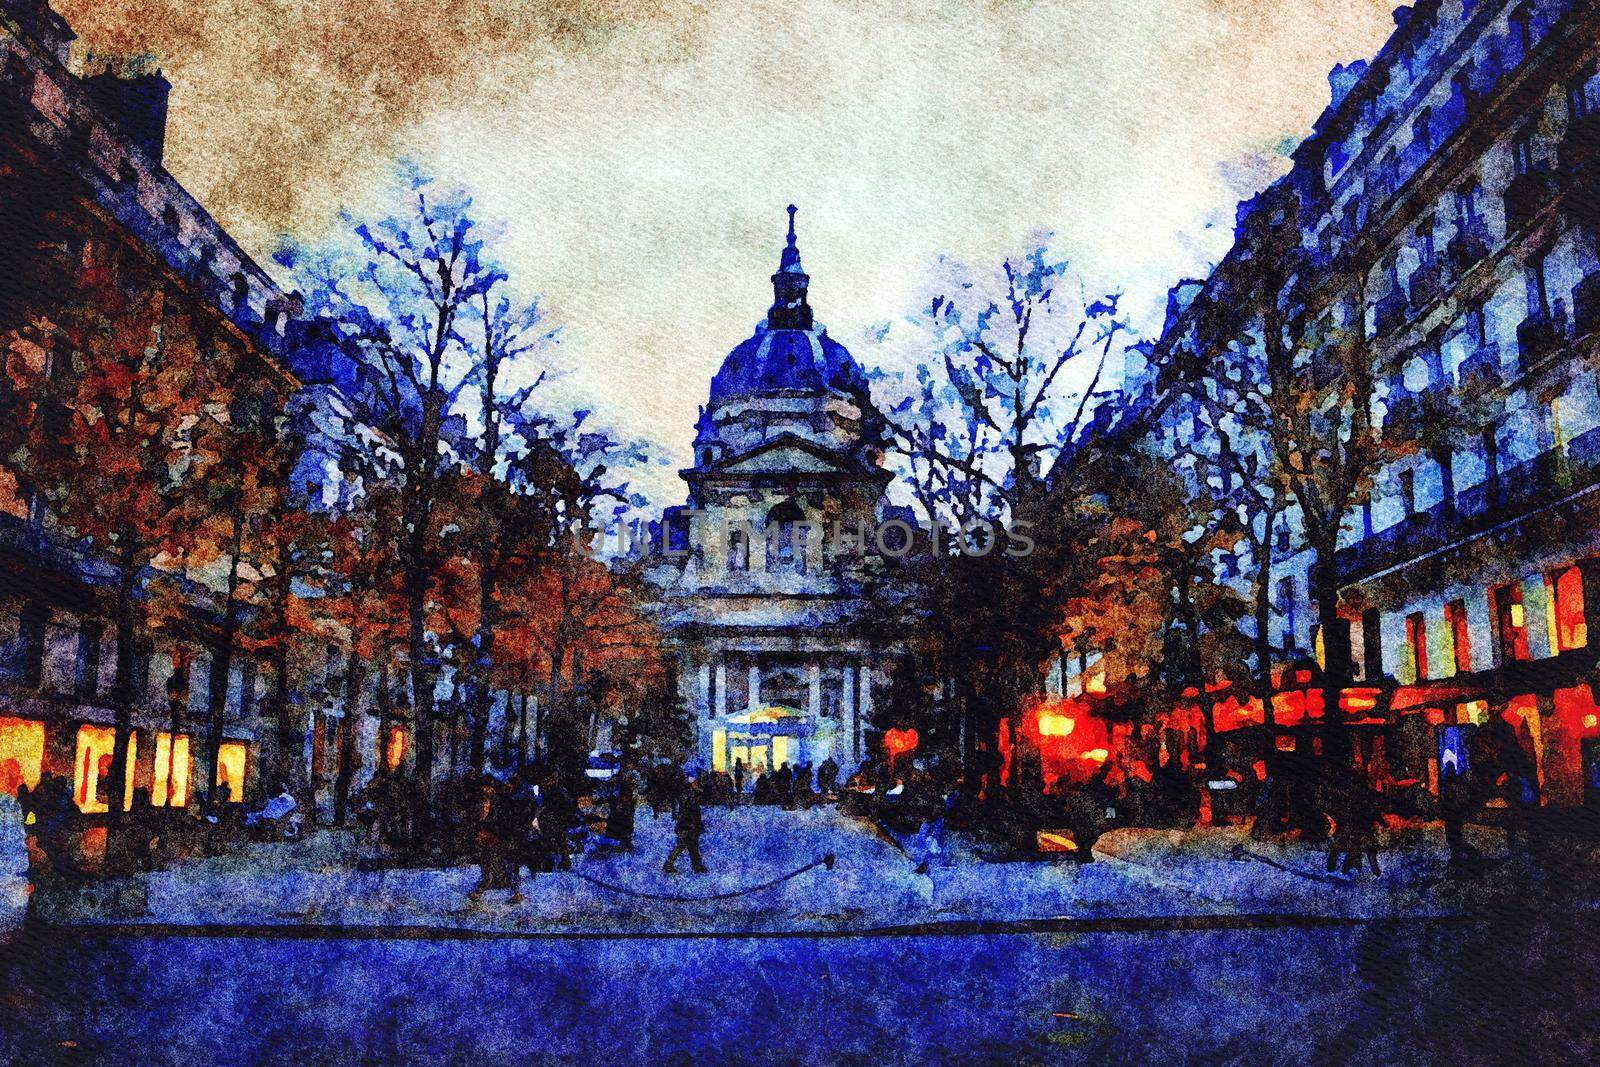 watercolor representing one of the squares in the center of Paris